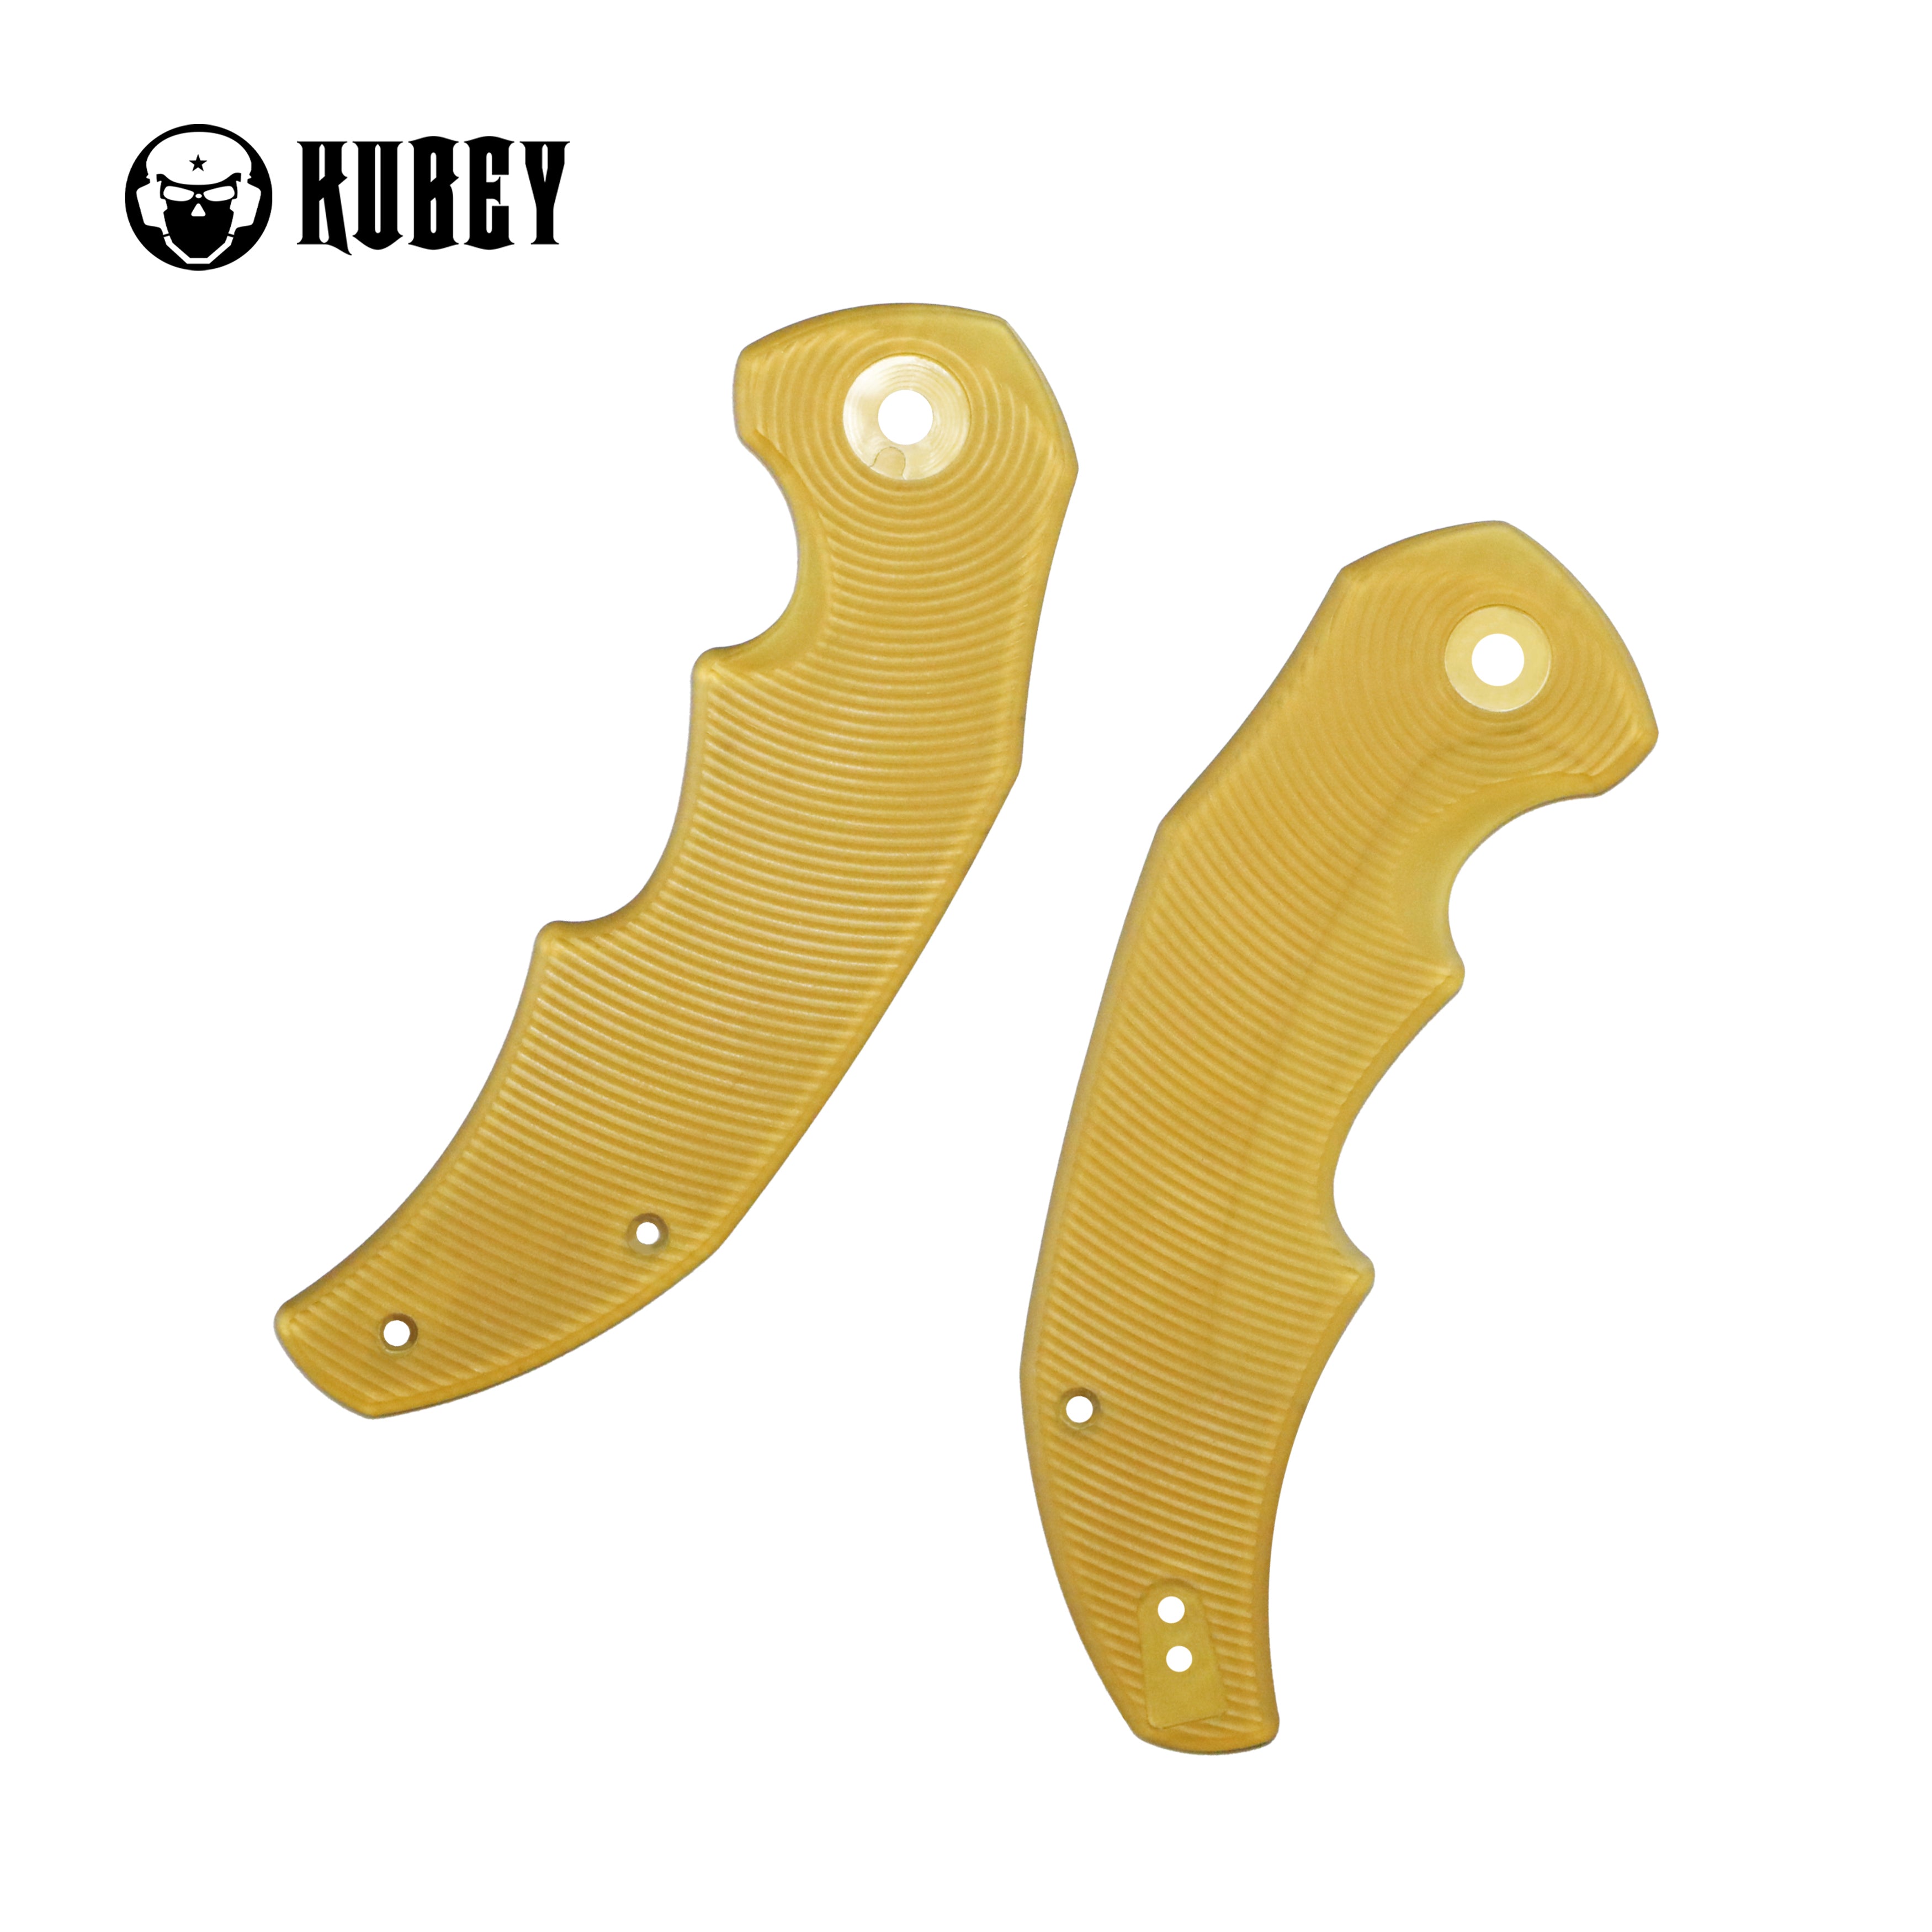 Kubey Replacement Hardware Ultem Handle Scales for EDC Pocket Knives, No Screws Included, KH040